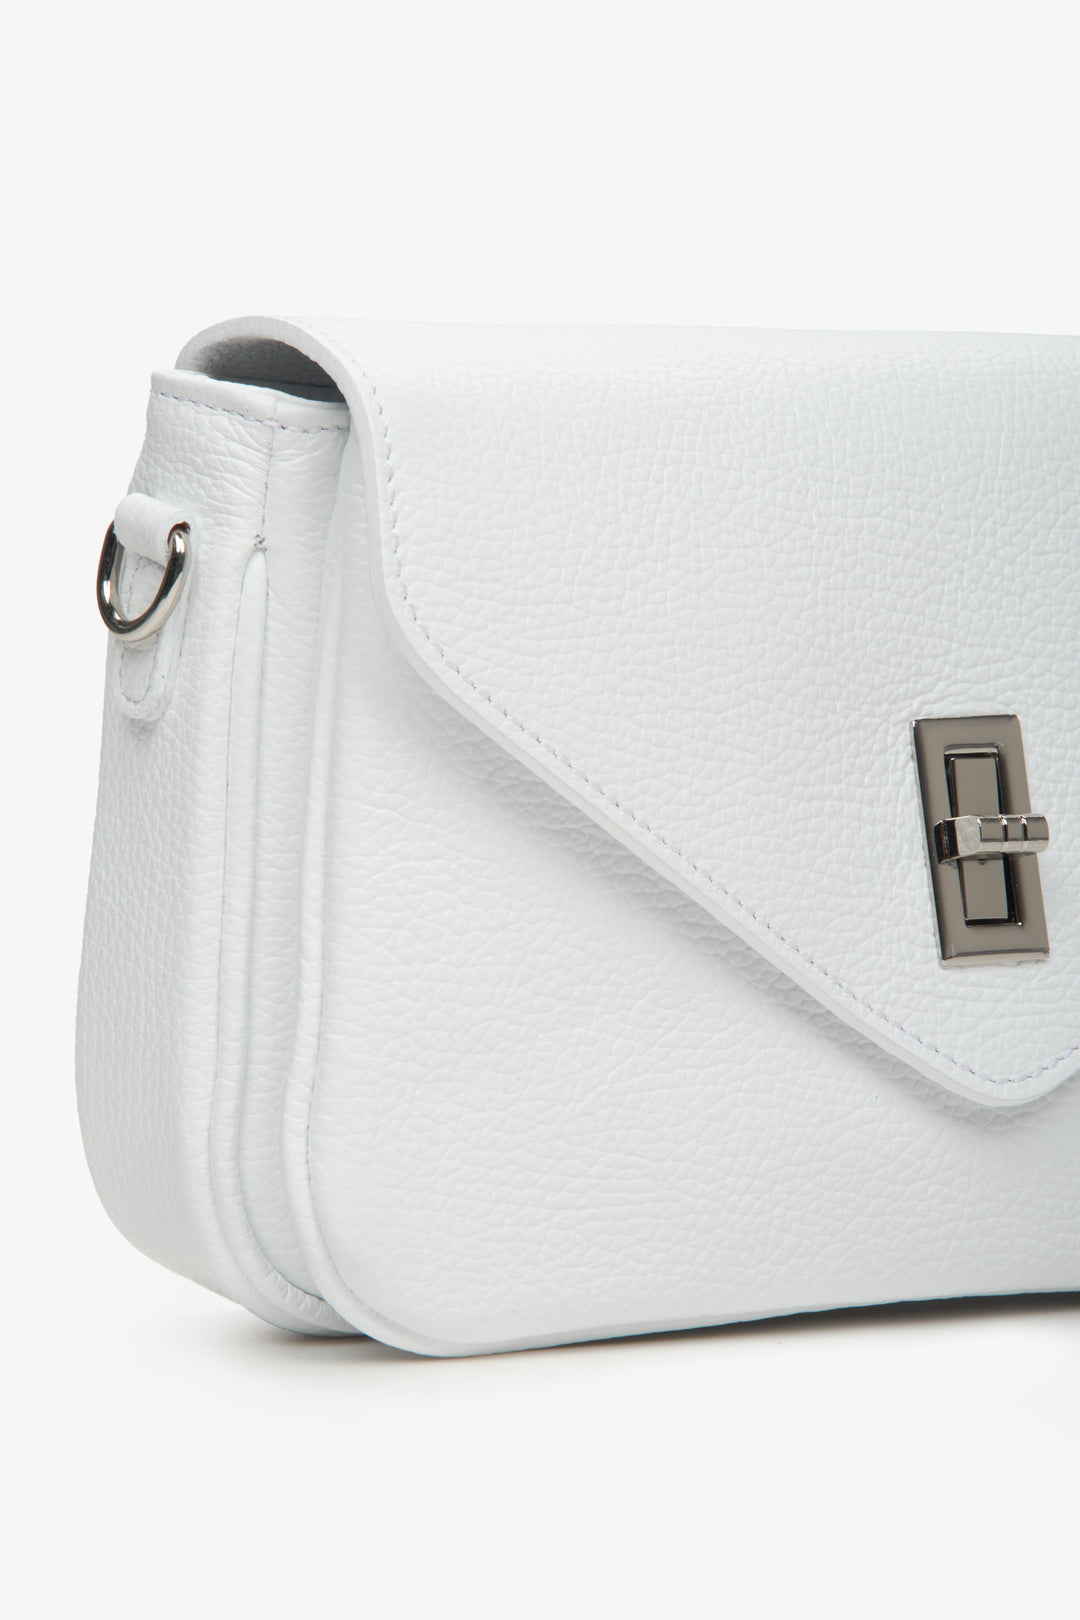 White small ESTRO women's shoulder bag made of Italian natural leather.